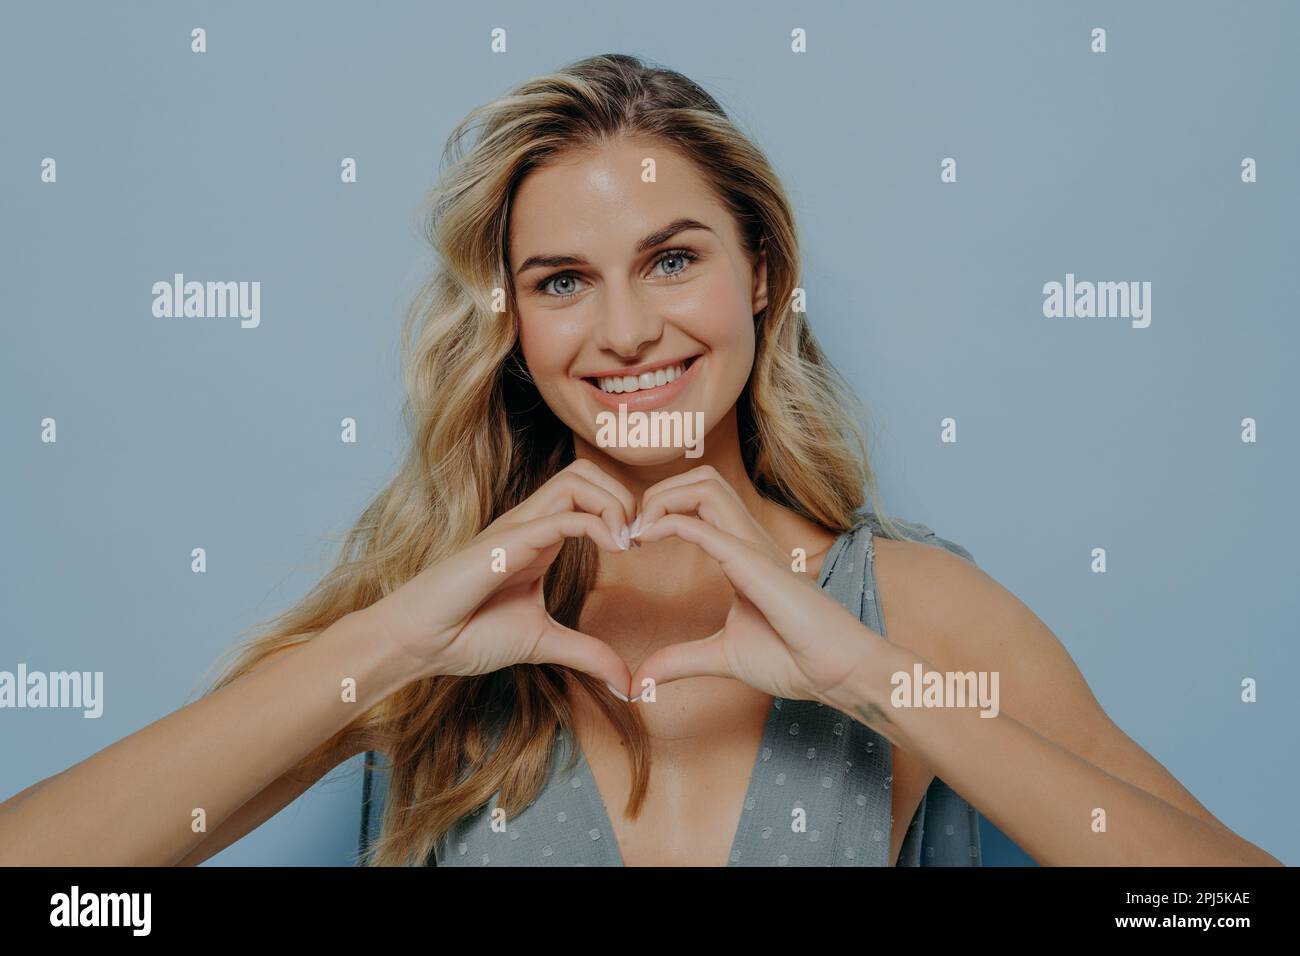 Image of lovely blonde woman in blue dress admitting in her love with use of heart gesture she made out of her hands, holding it in front while standi Stock Photo